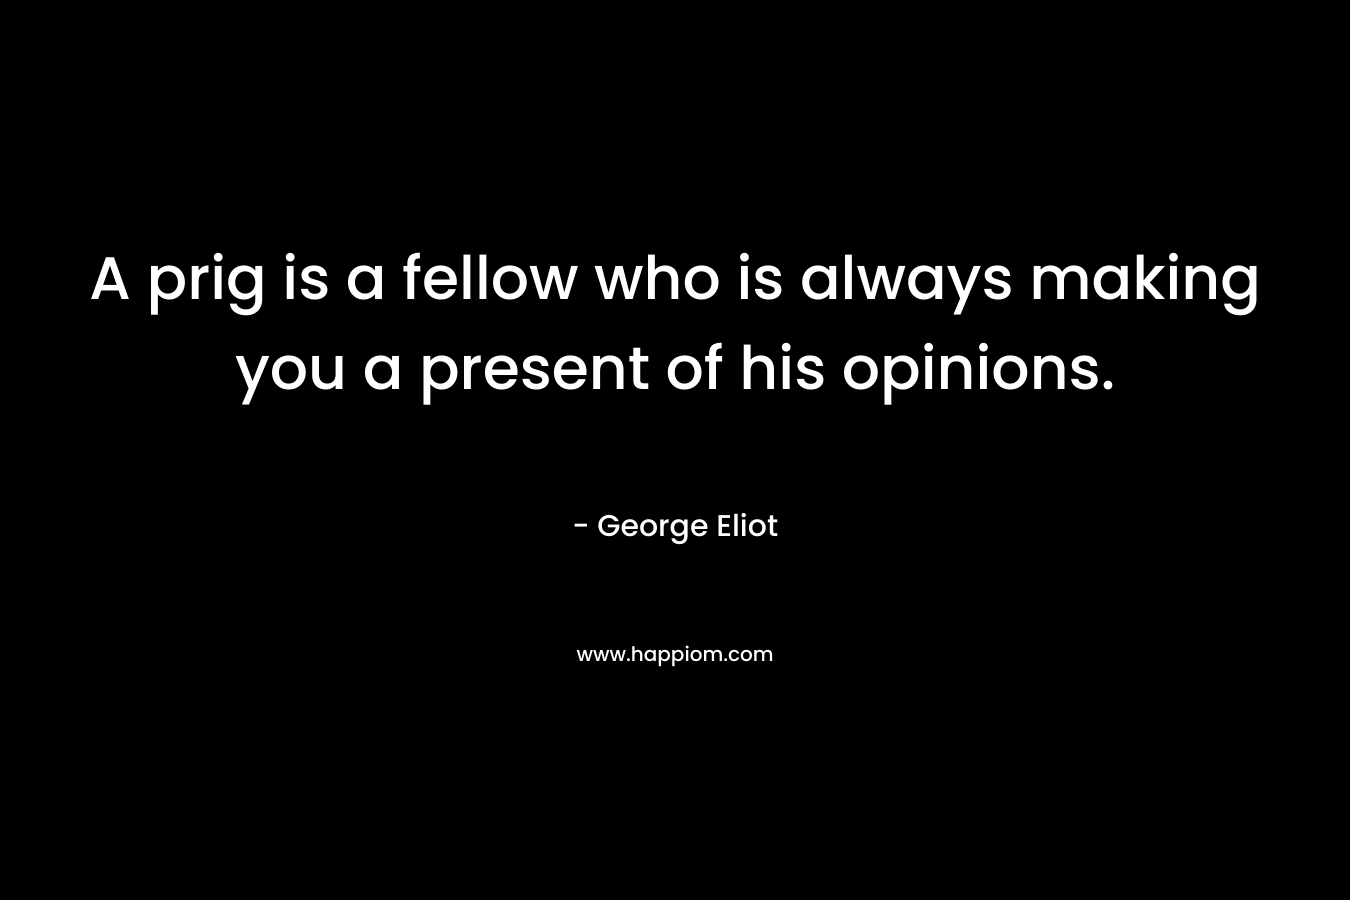 A prig is a fellow who is always making you a present of his opinions.